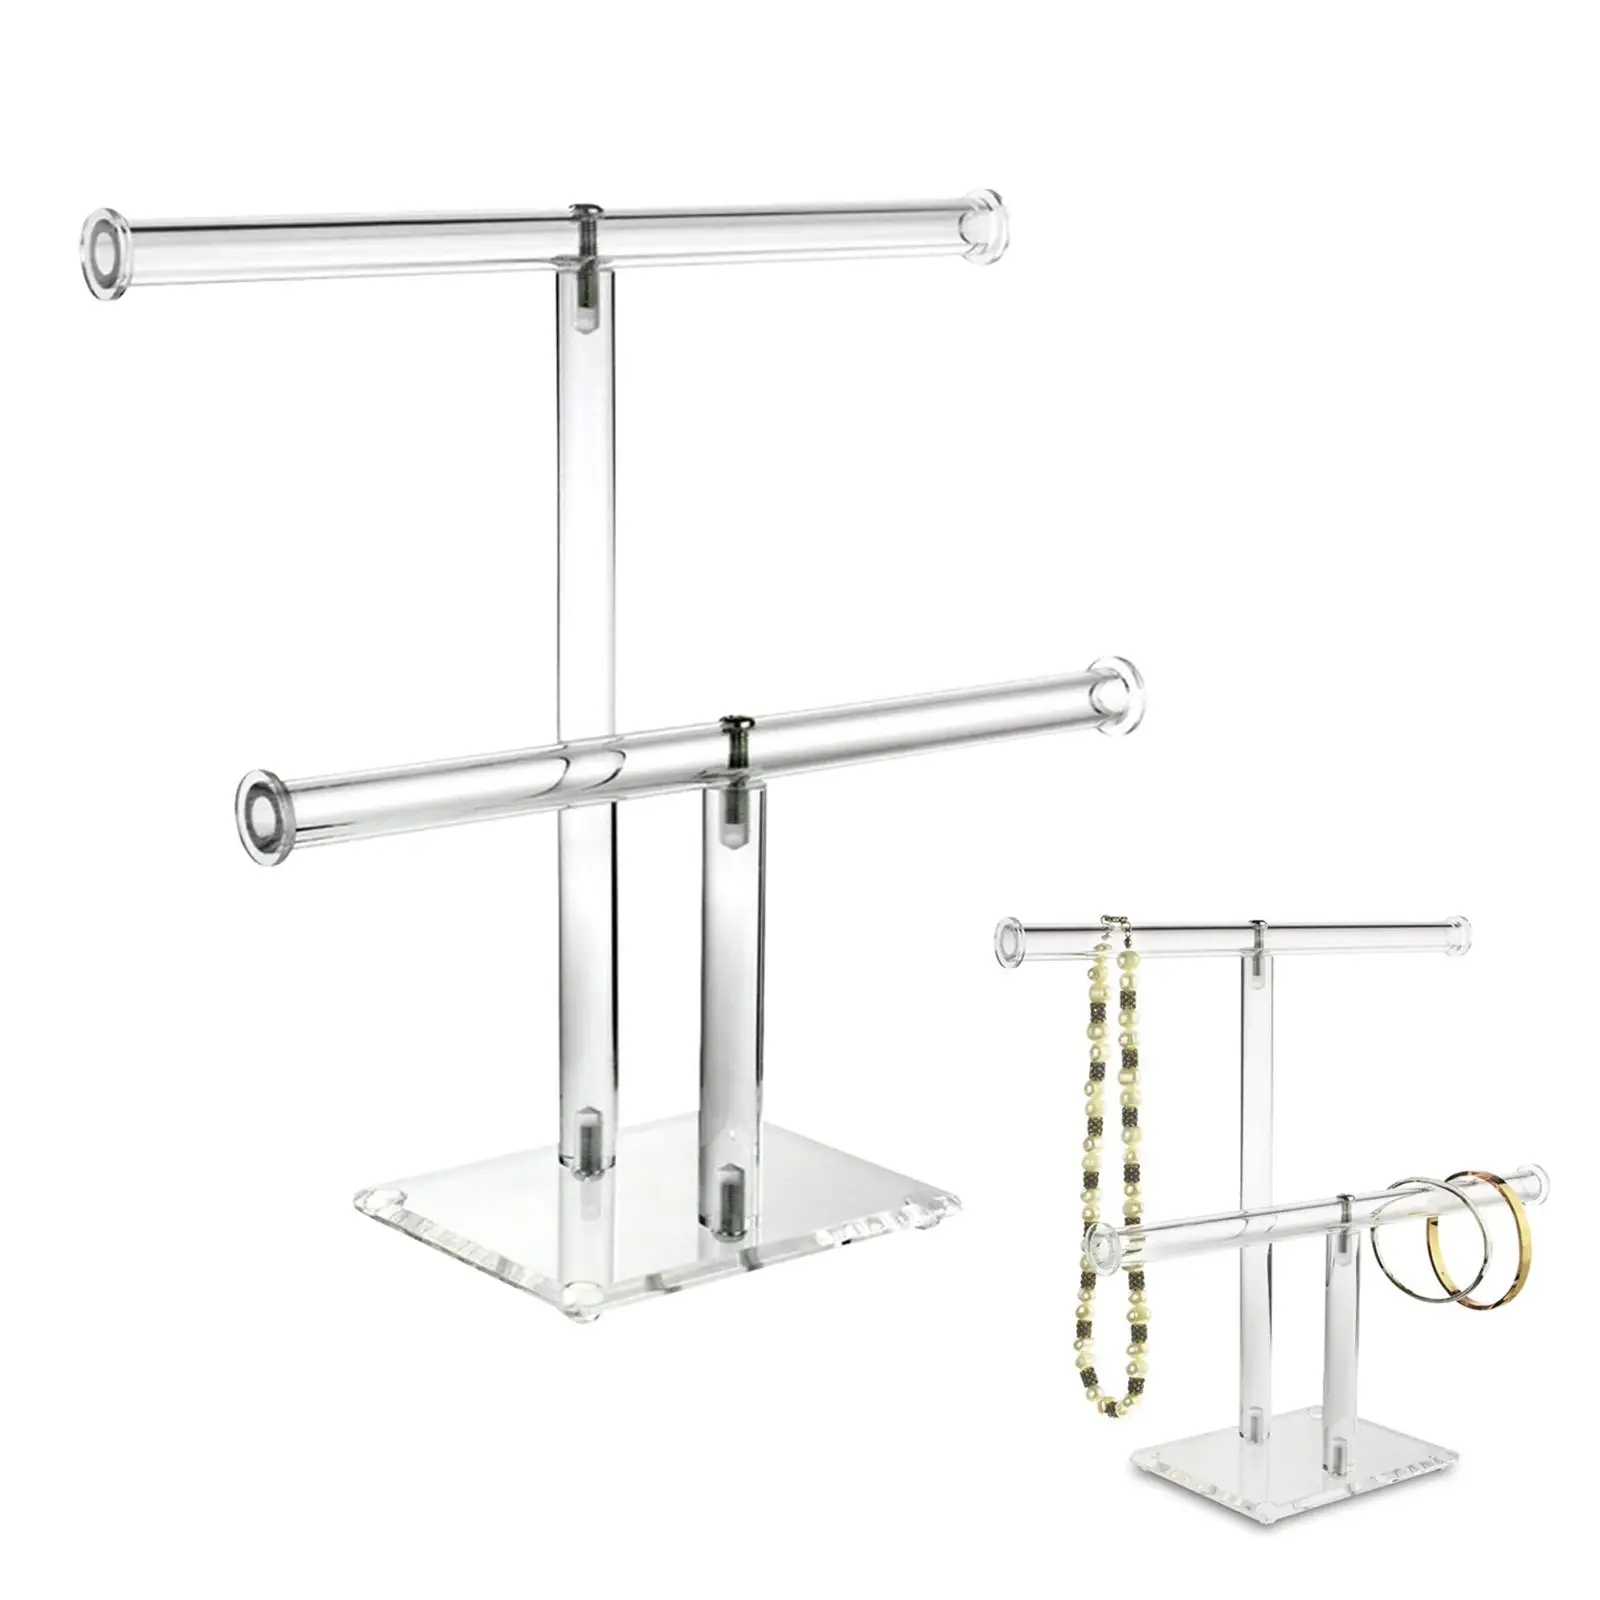 Jewelry Display Stand Holder Acrylic Clear Organizer for Earrings Necklaces Selling Retail